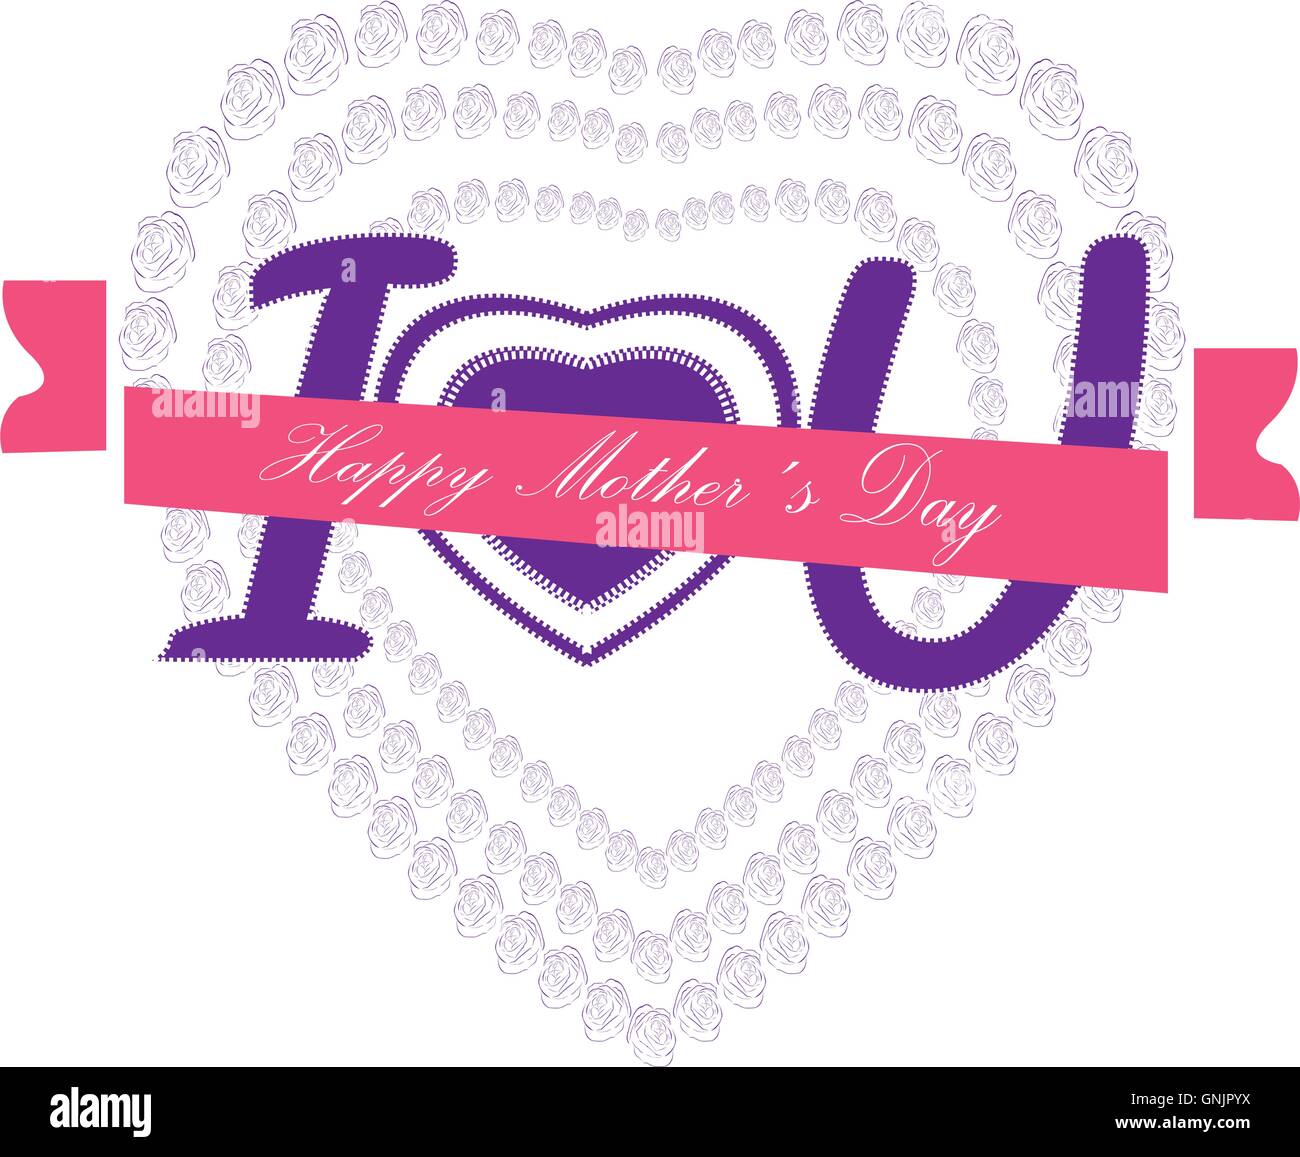 Isolated hearts composed by flowers and text on a white background for mother's day celebrations Stock Vector